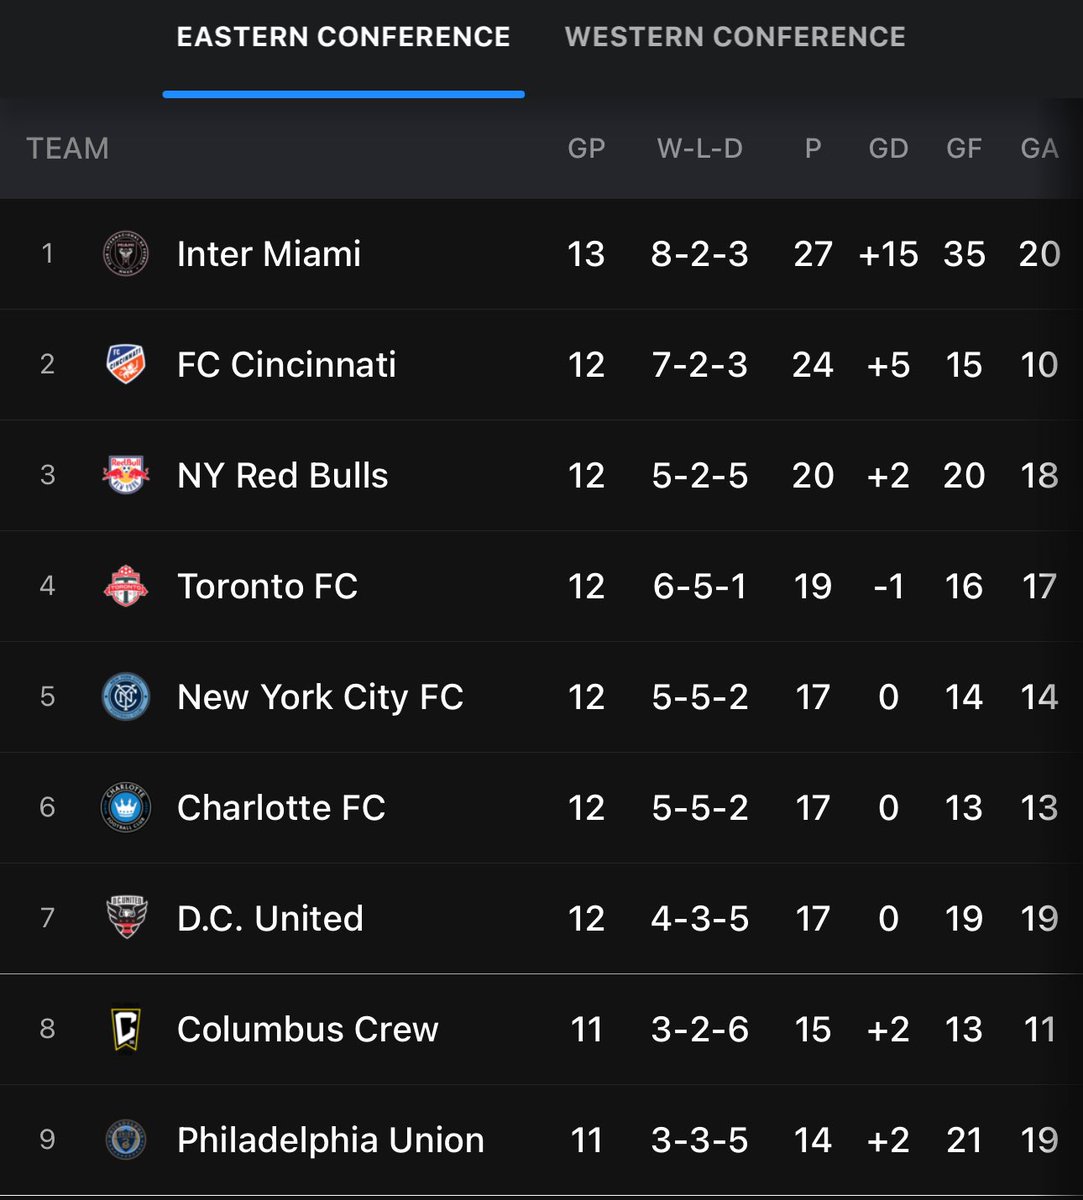 With 3-2 victory Saturday, Messi and Inter Miami continues their hot streak, unbeaten in their last 7 matches, guaranteed to remain at the top of the table.🦩❤️‍🔥🦩